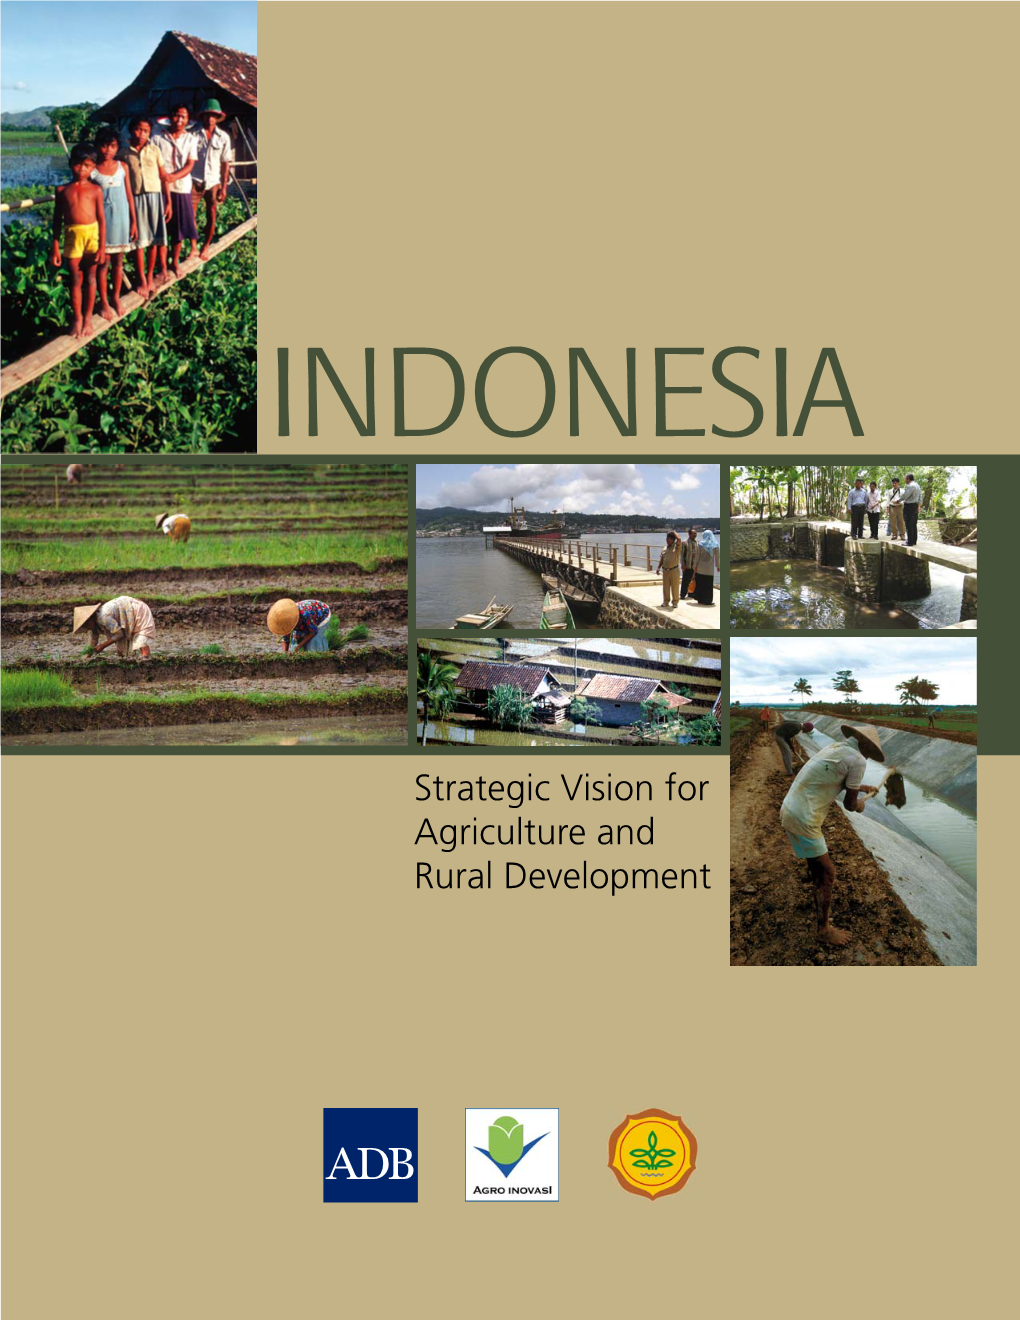 Indonesia: Strategic Vision for Agriculture and Rural Development